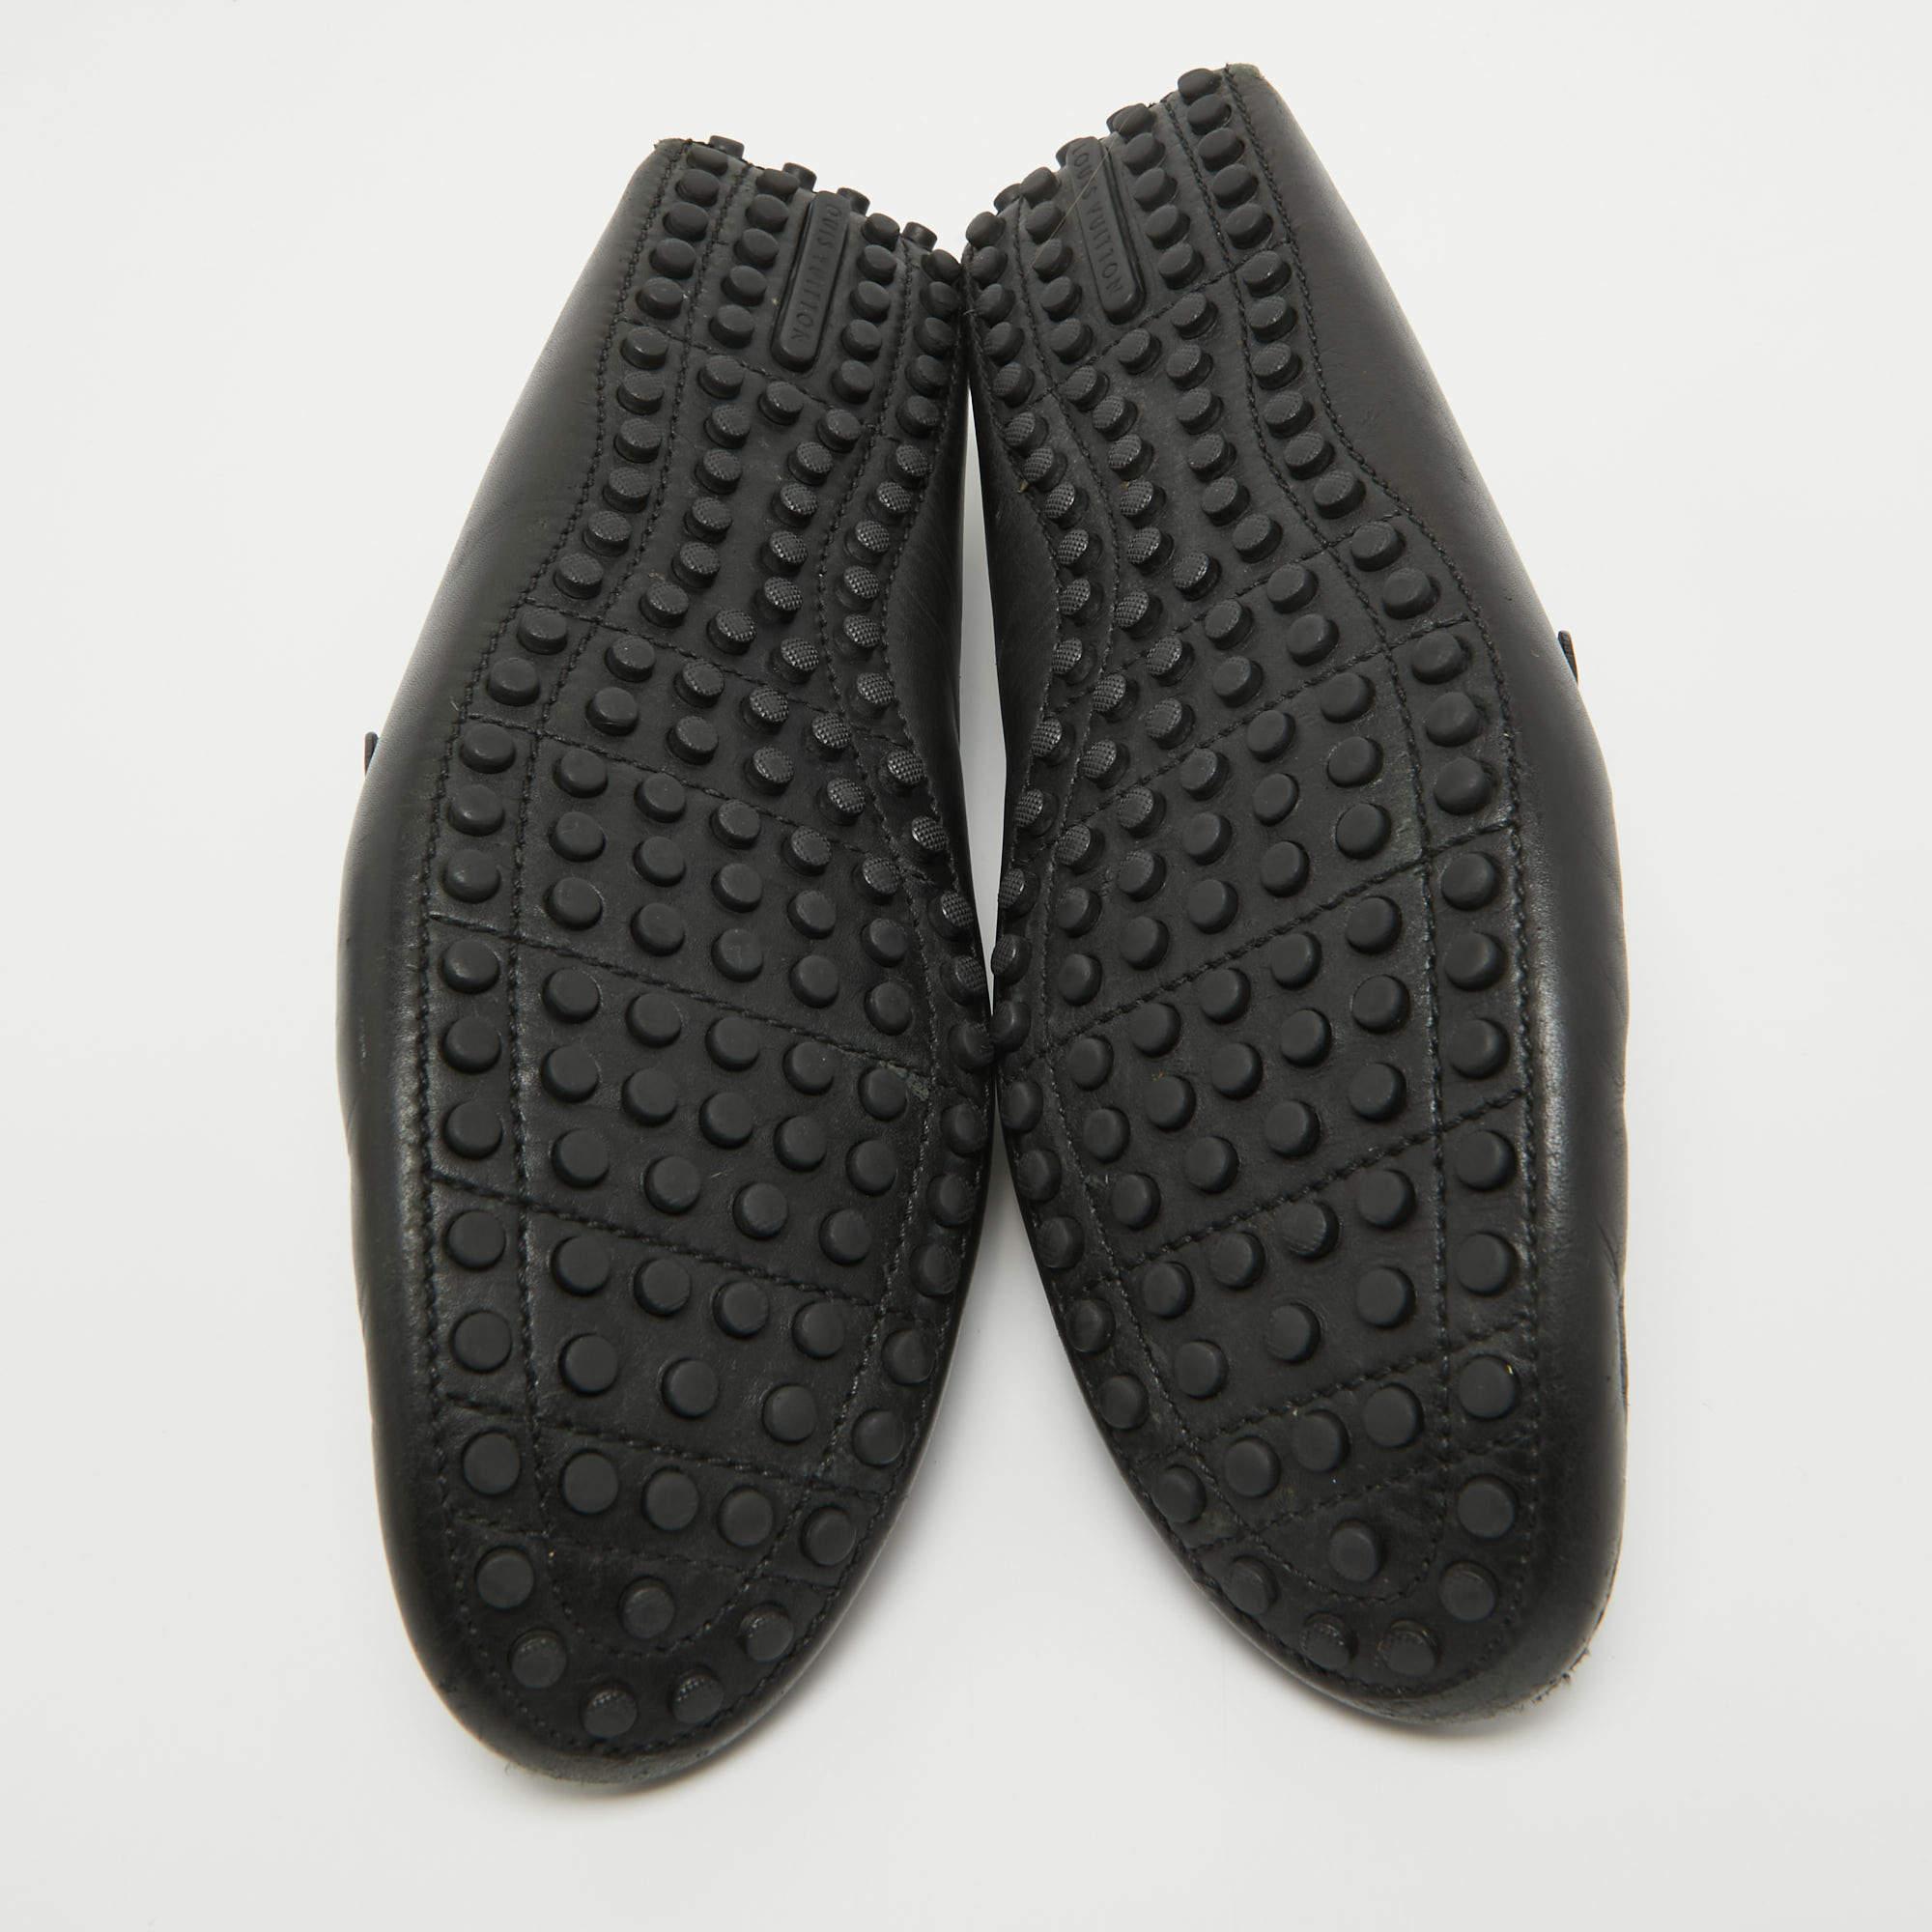 Louis Vuitton Black Leather Slip On Loafers Size 42.5 For Sale 1